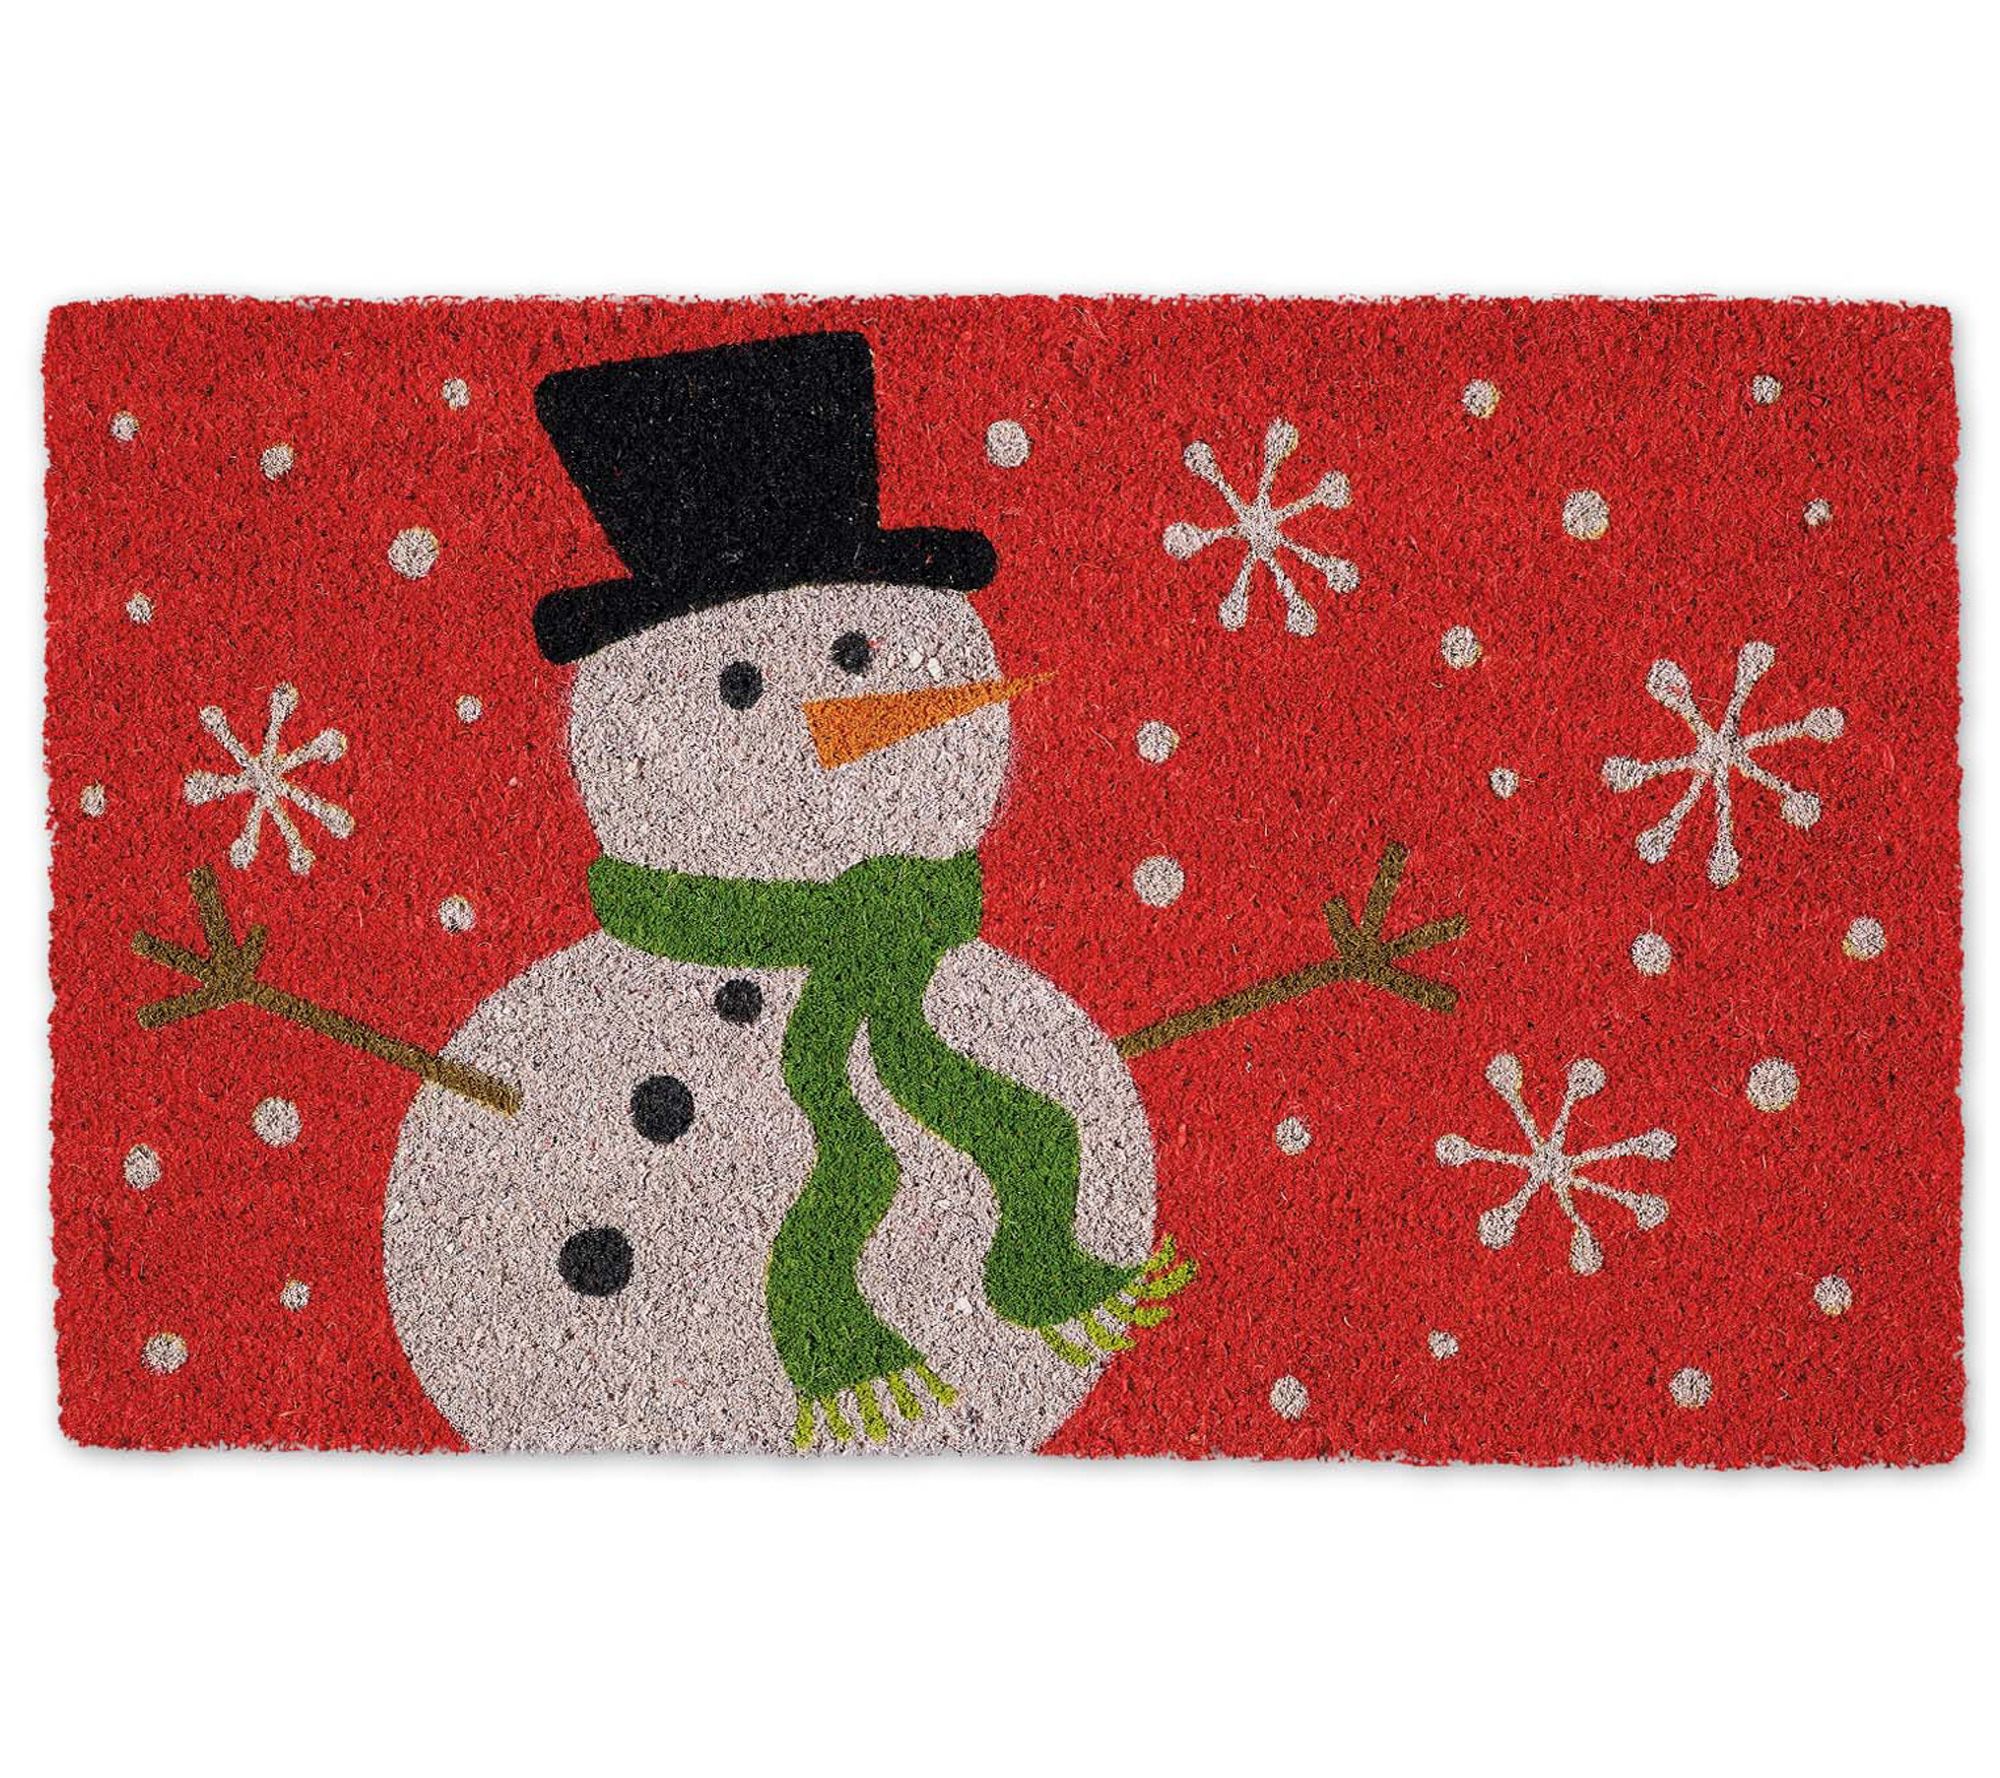  Snowmen Indoor Door Mat, Non-Slip Water Absorbent Entrance Mat  with Durable Rubber Backing, Christmas Trees Rustic Snow Scene Red Plaid  Low-Profile Floor Mat for Home High Traffic Area 24x71 : Patio